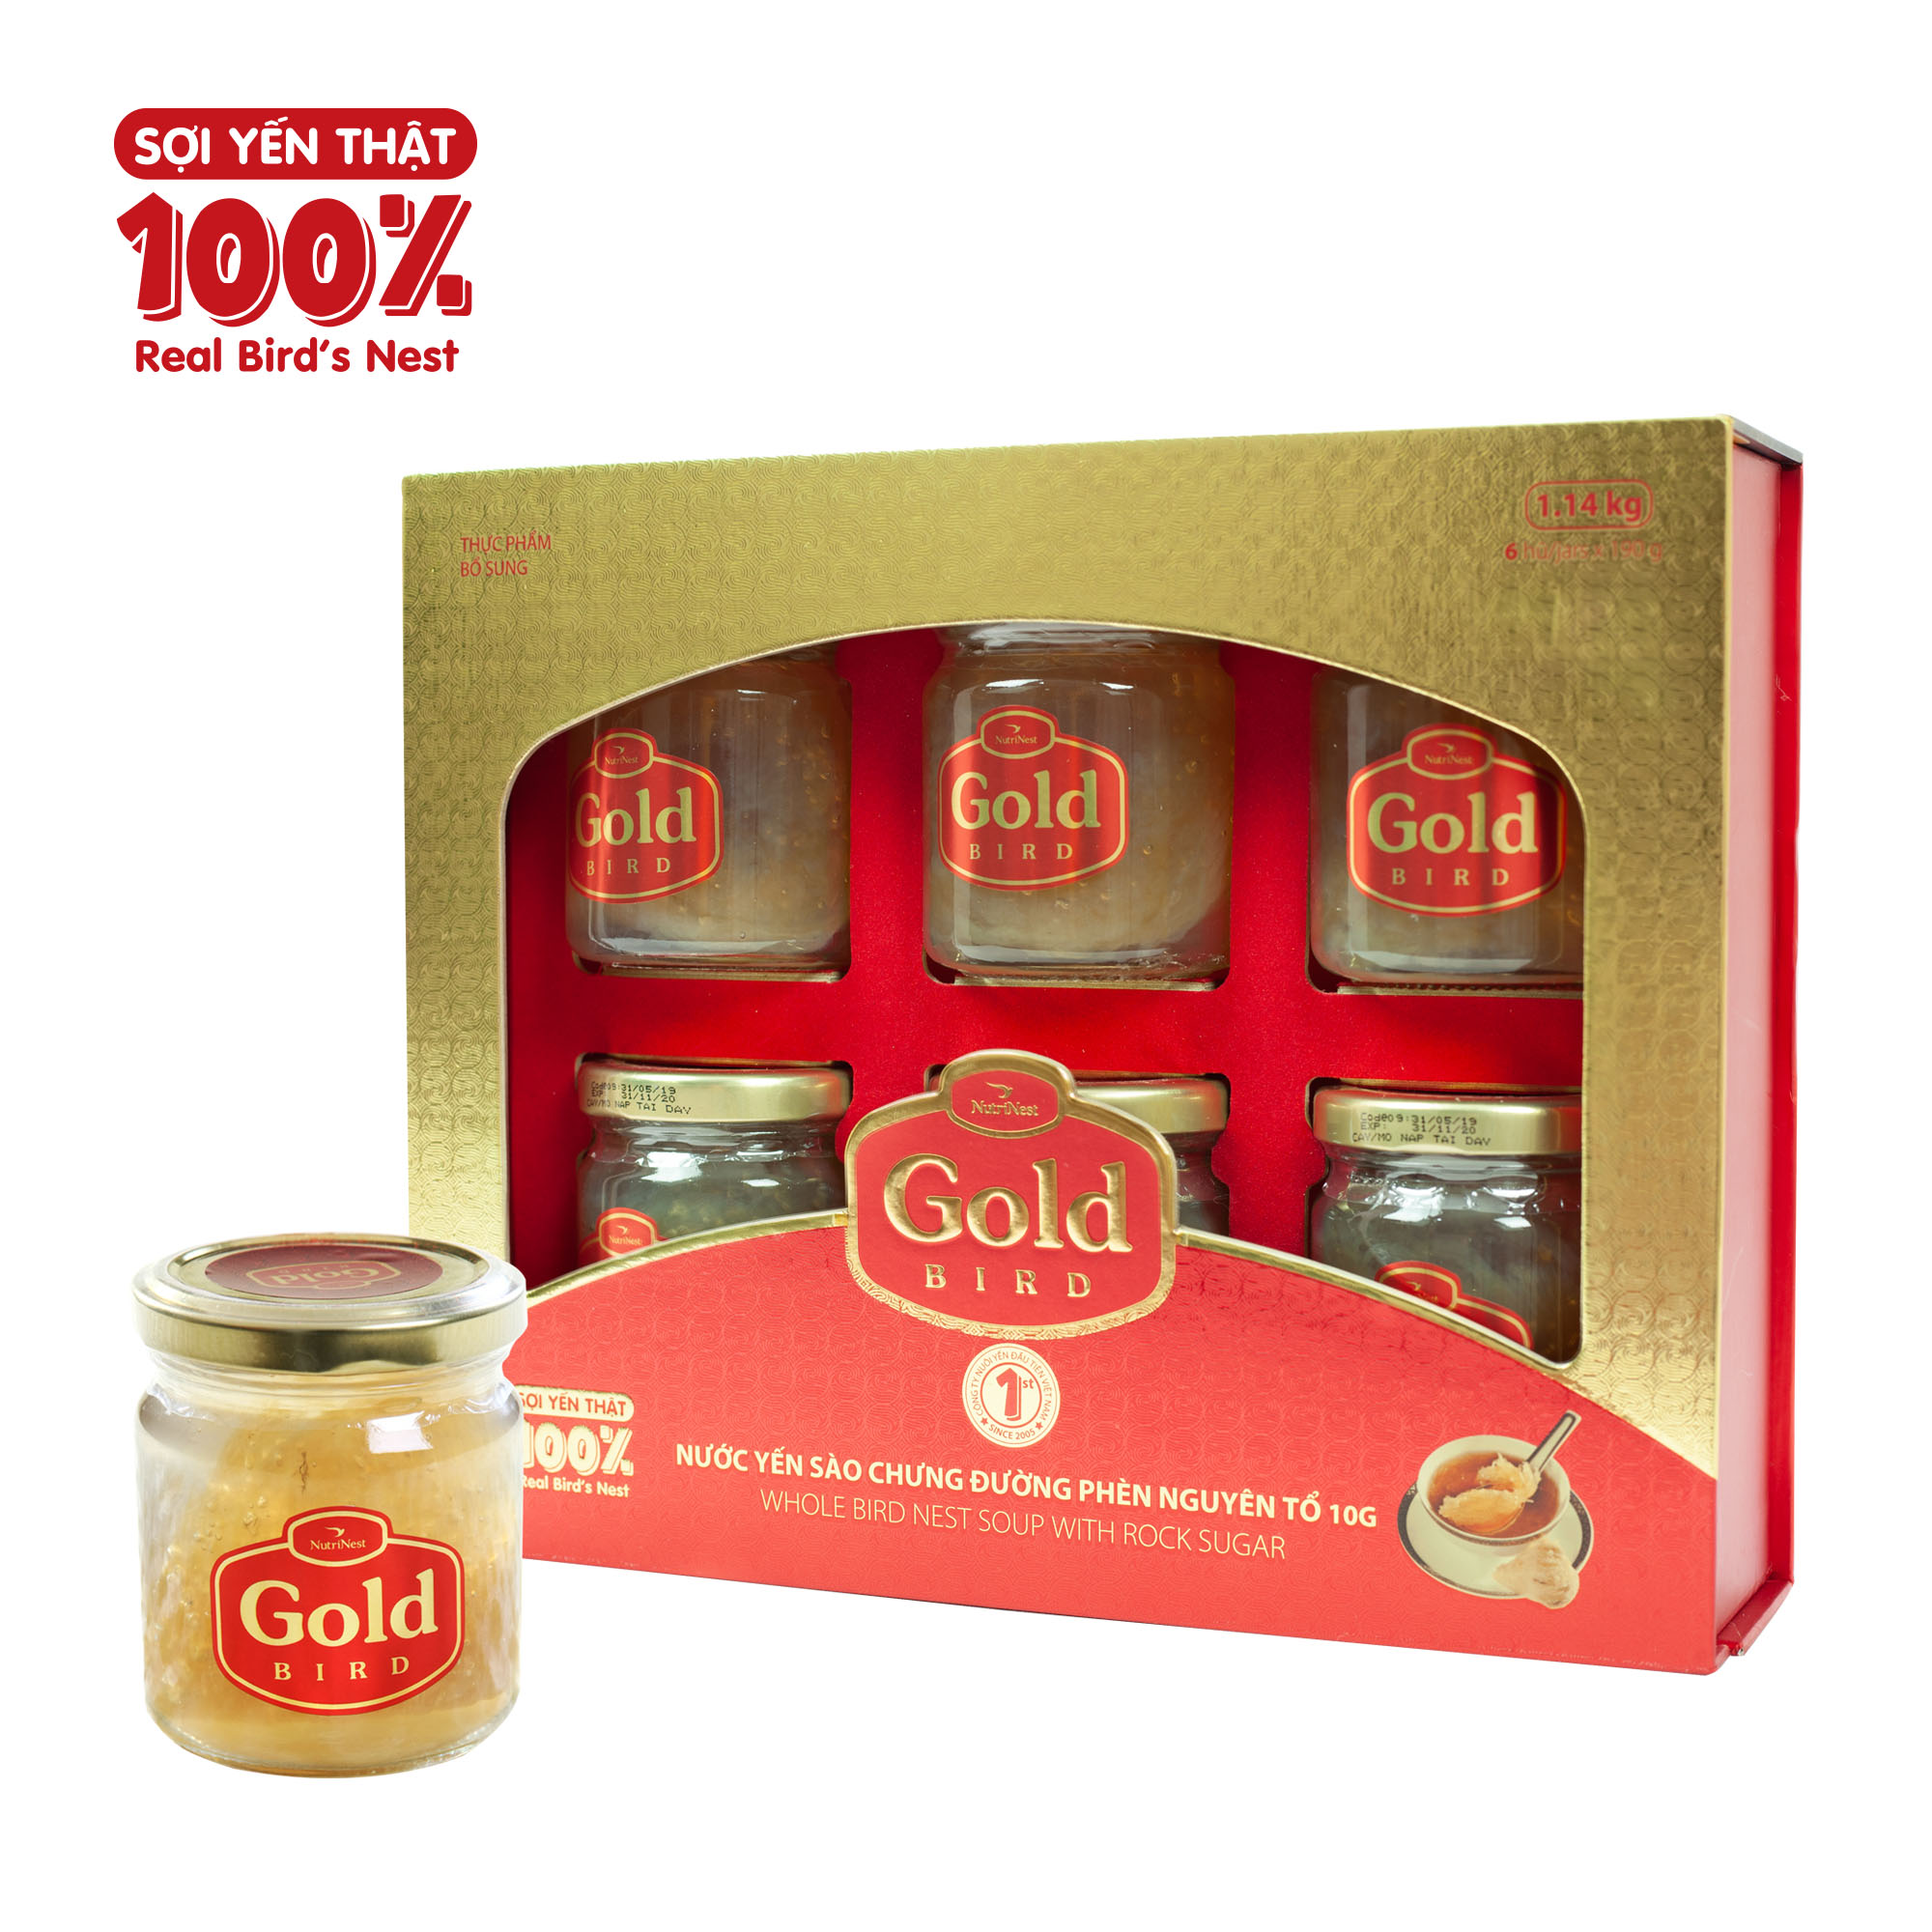  Gold - Whole bird's nest soup with rock sugar - Gift box 6 jars x 190gr 